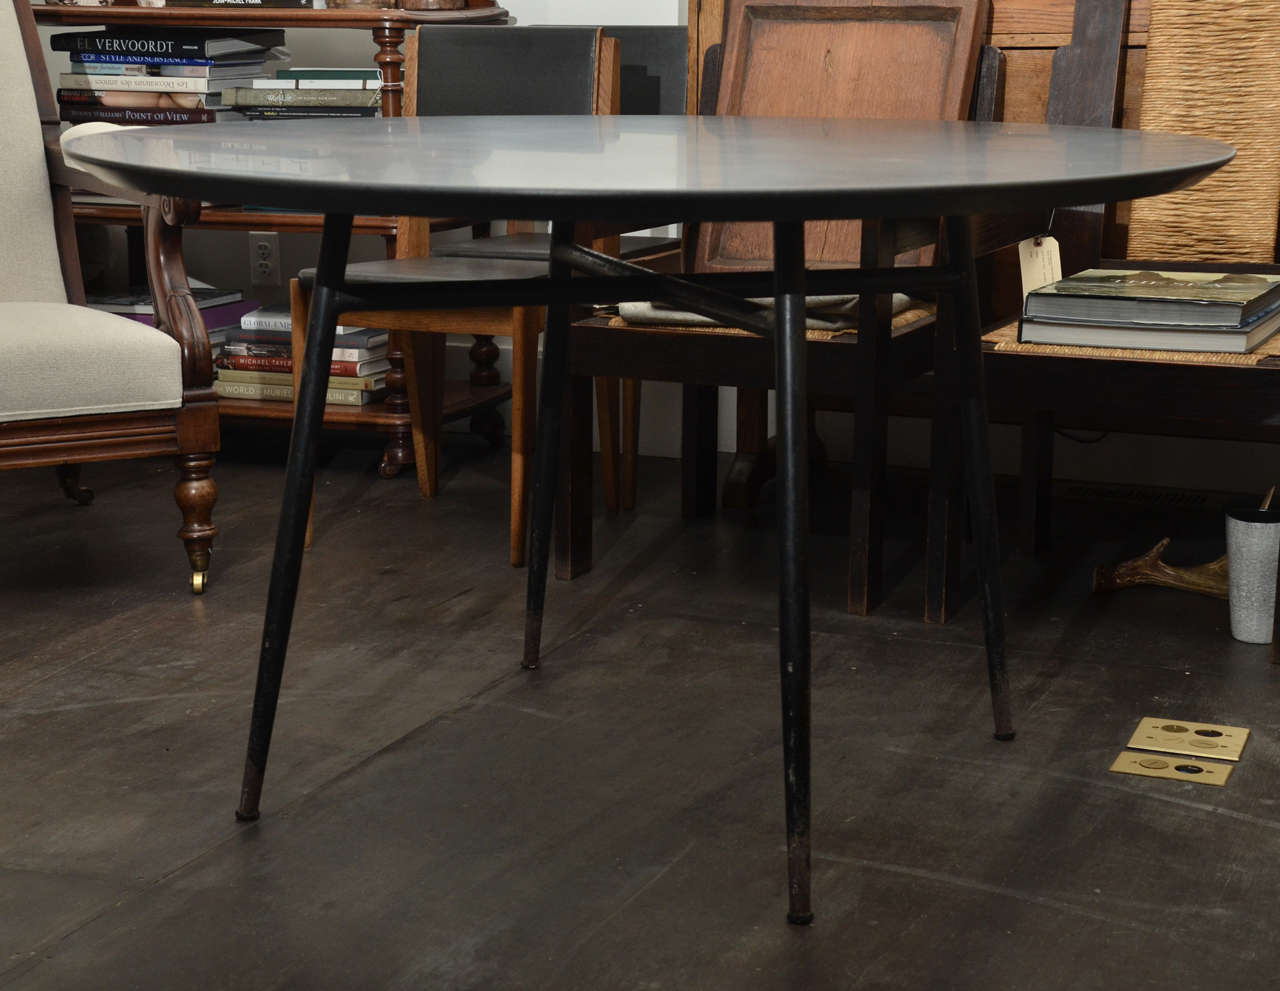 Vintage metal table base with original black powder coated finish - some patina on legs - Round table with contemporary absolute black granite top